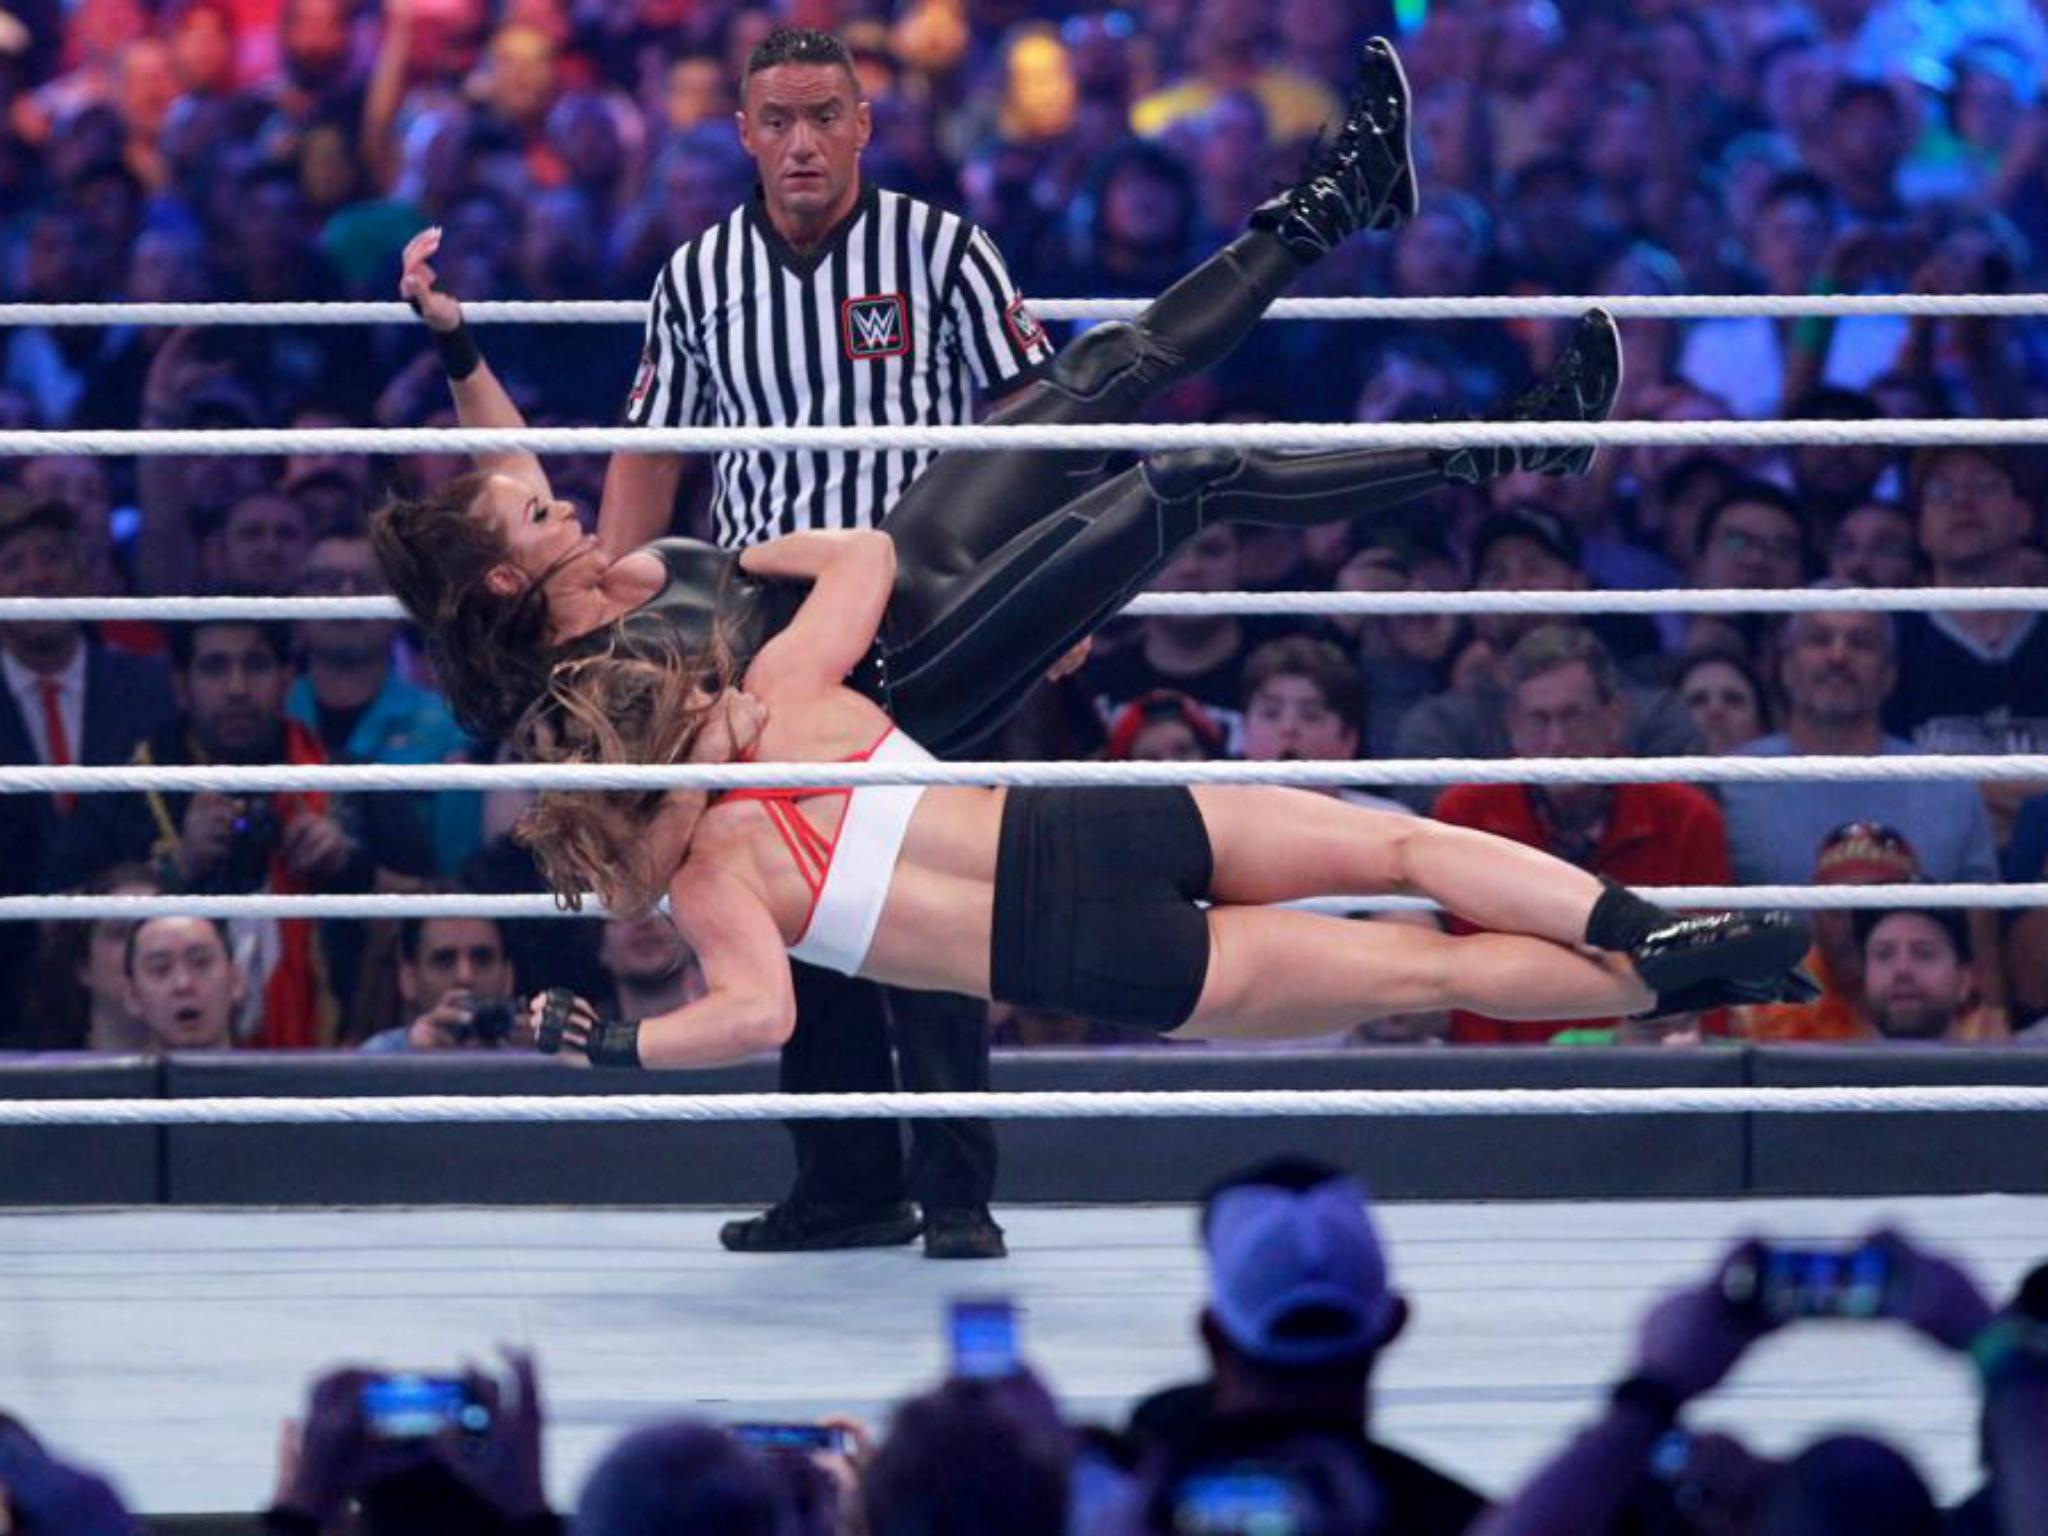 Rousey showed off her athletic ability and incredible strength (WWE)